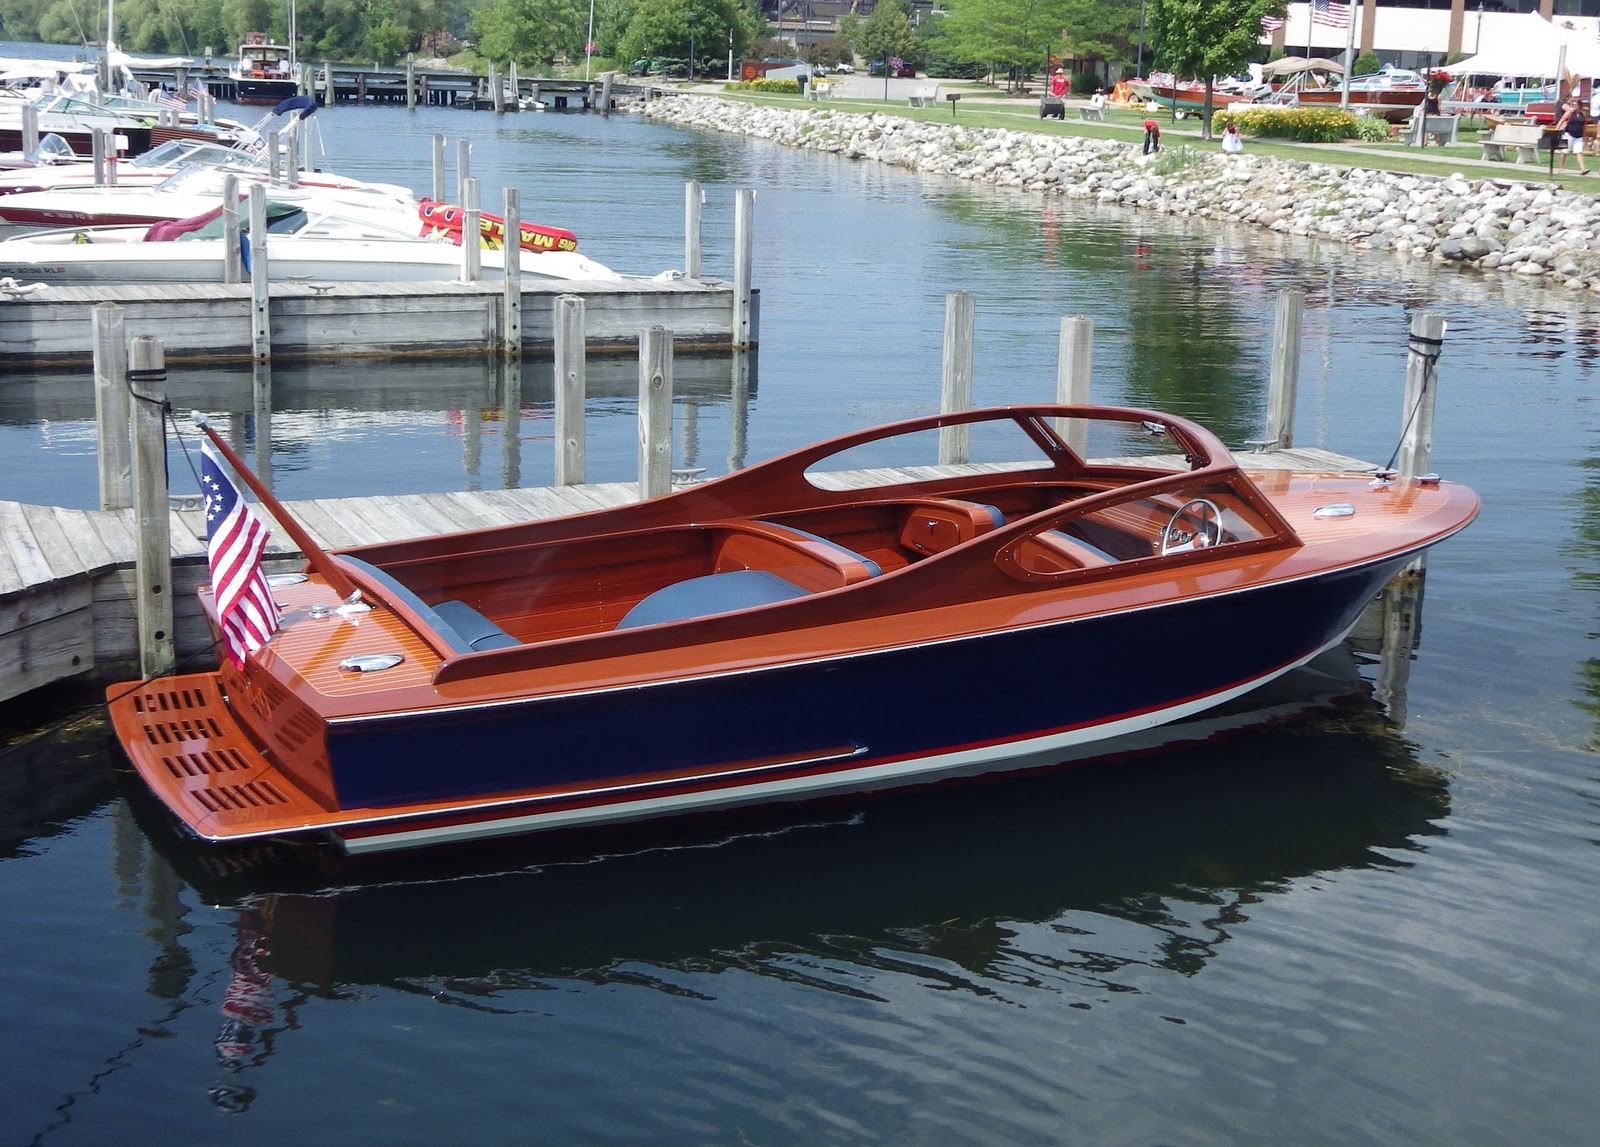 New Wood Boats - The Wooden Runabout Company